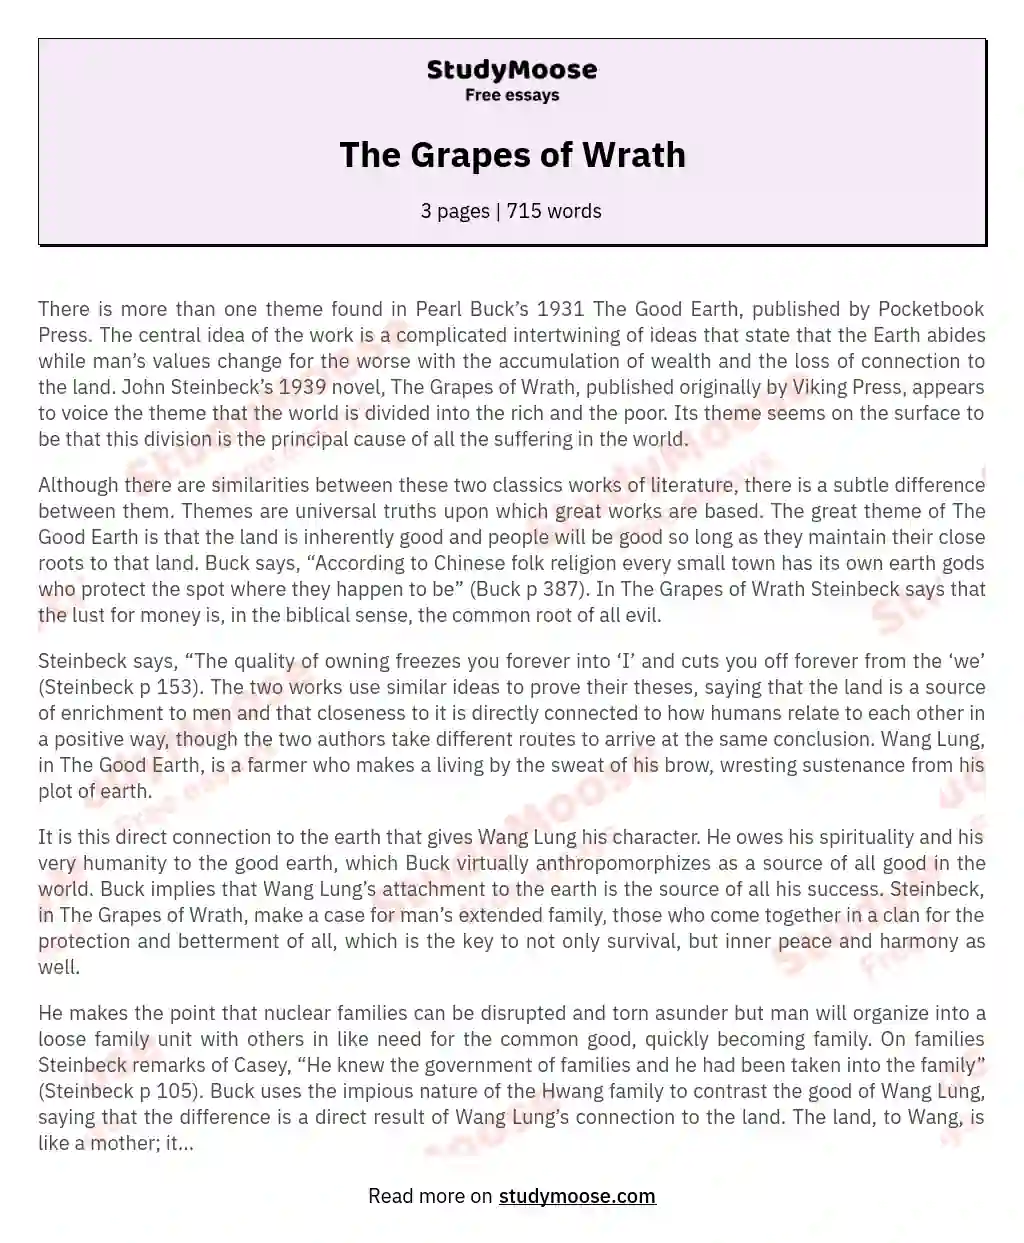 The Grapes of Wrath essay